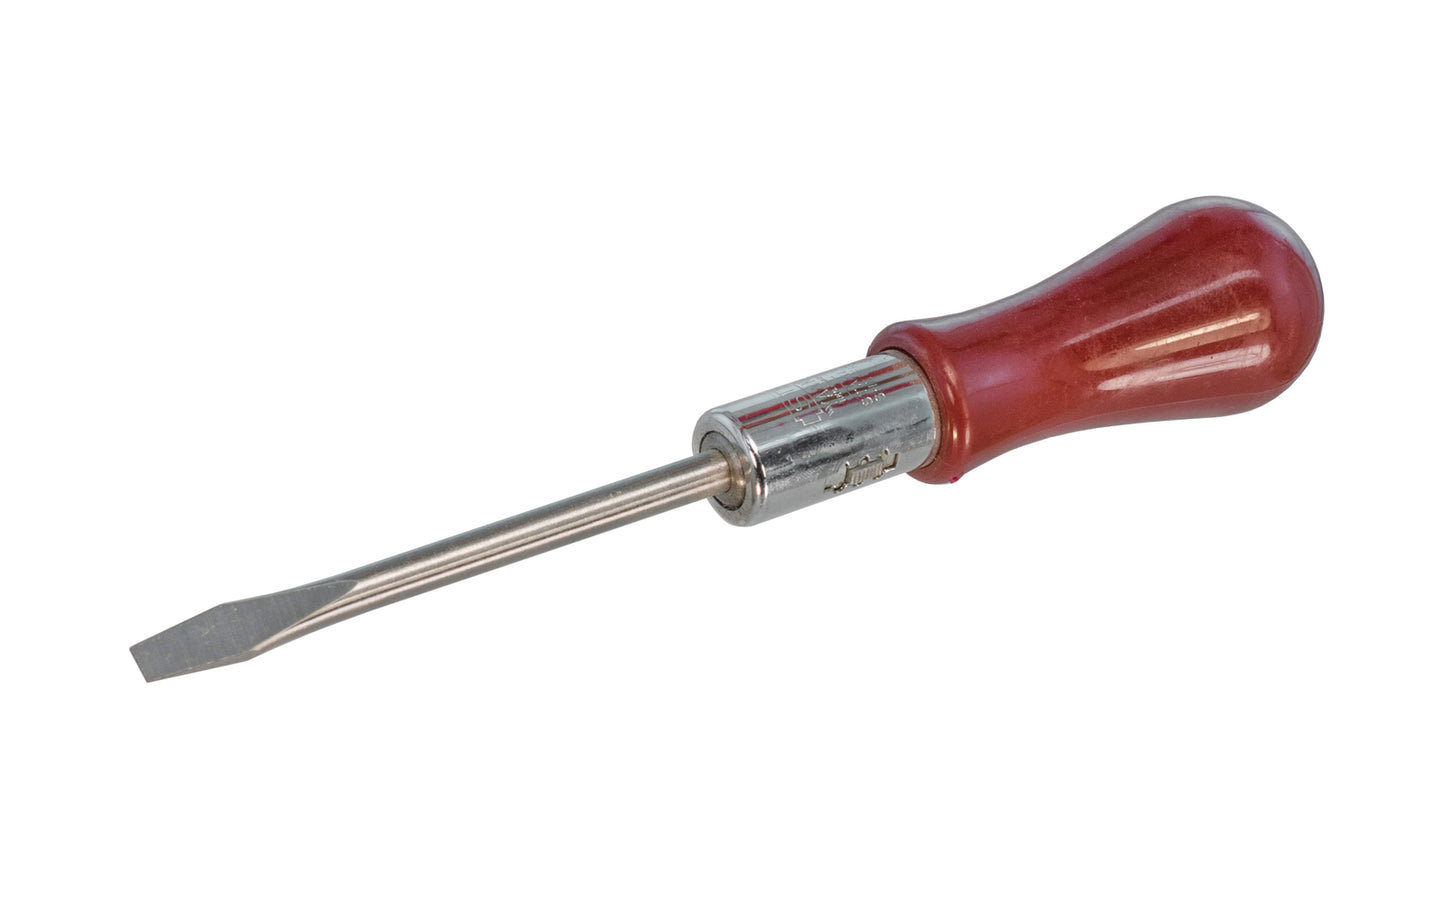 "Yankee 10A" screwdriver with slotted Drive - 4" long blade (100 mm). Fully heat treated & tempered bar for long life. Ratcheting Stanley screwdriver 4" long blade (100 mm). Model No. 3-68-104.  Brand new un-used old stock.   Made in England. 3253563681040